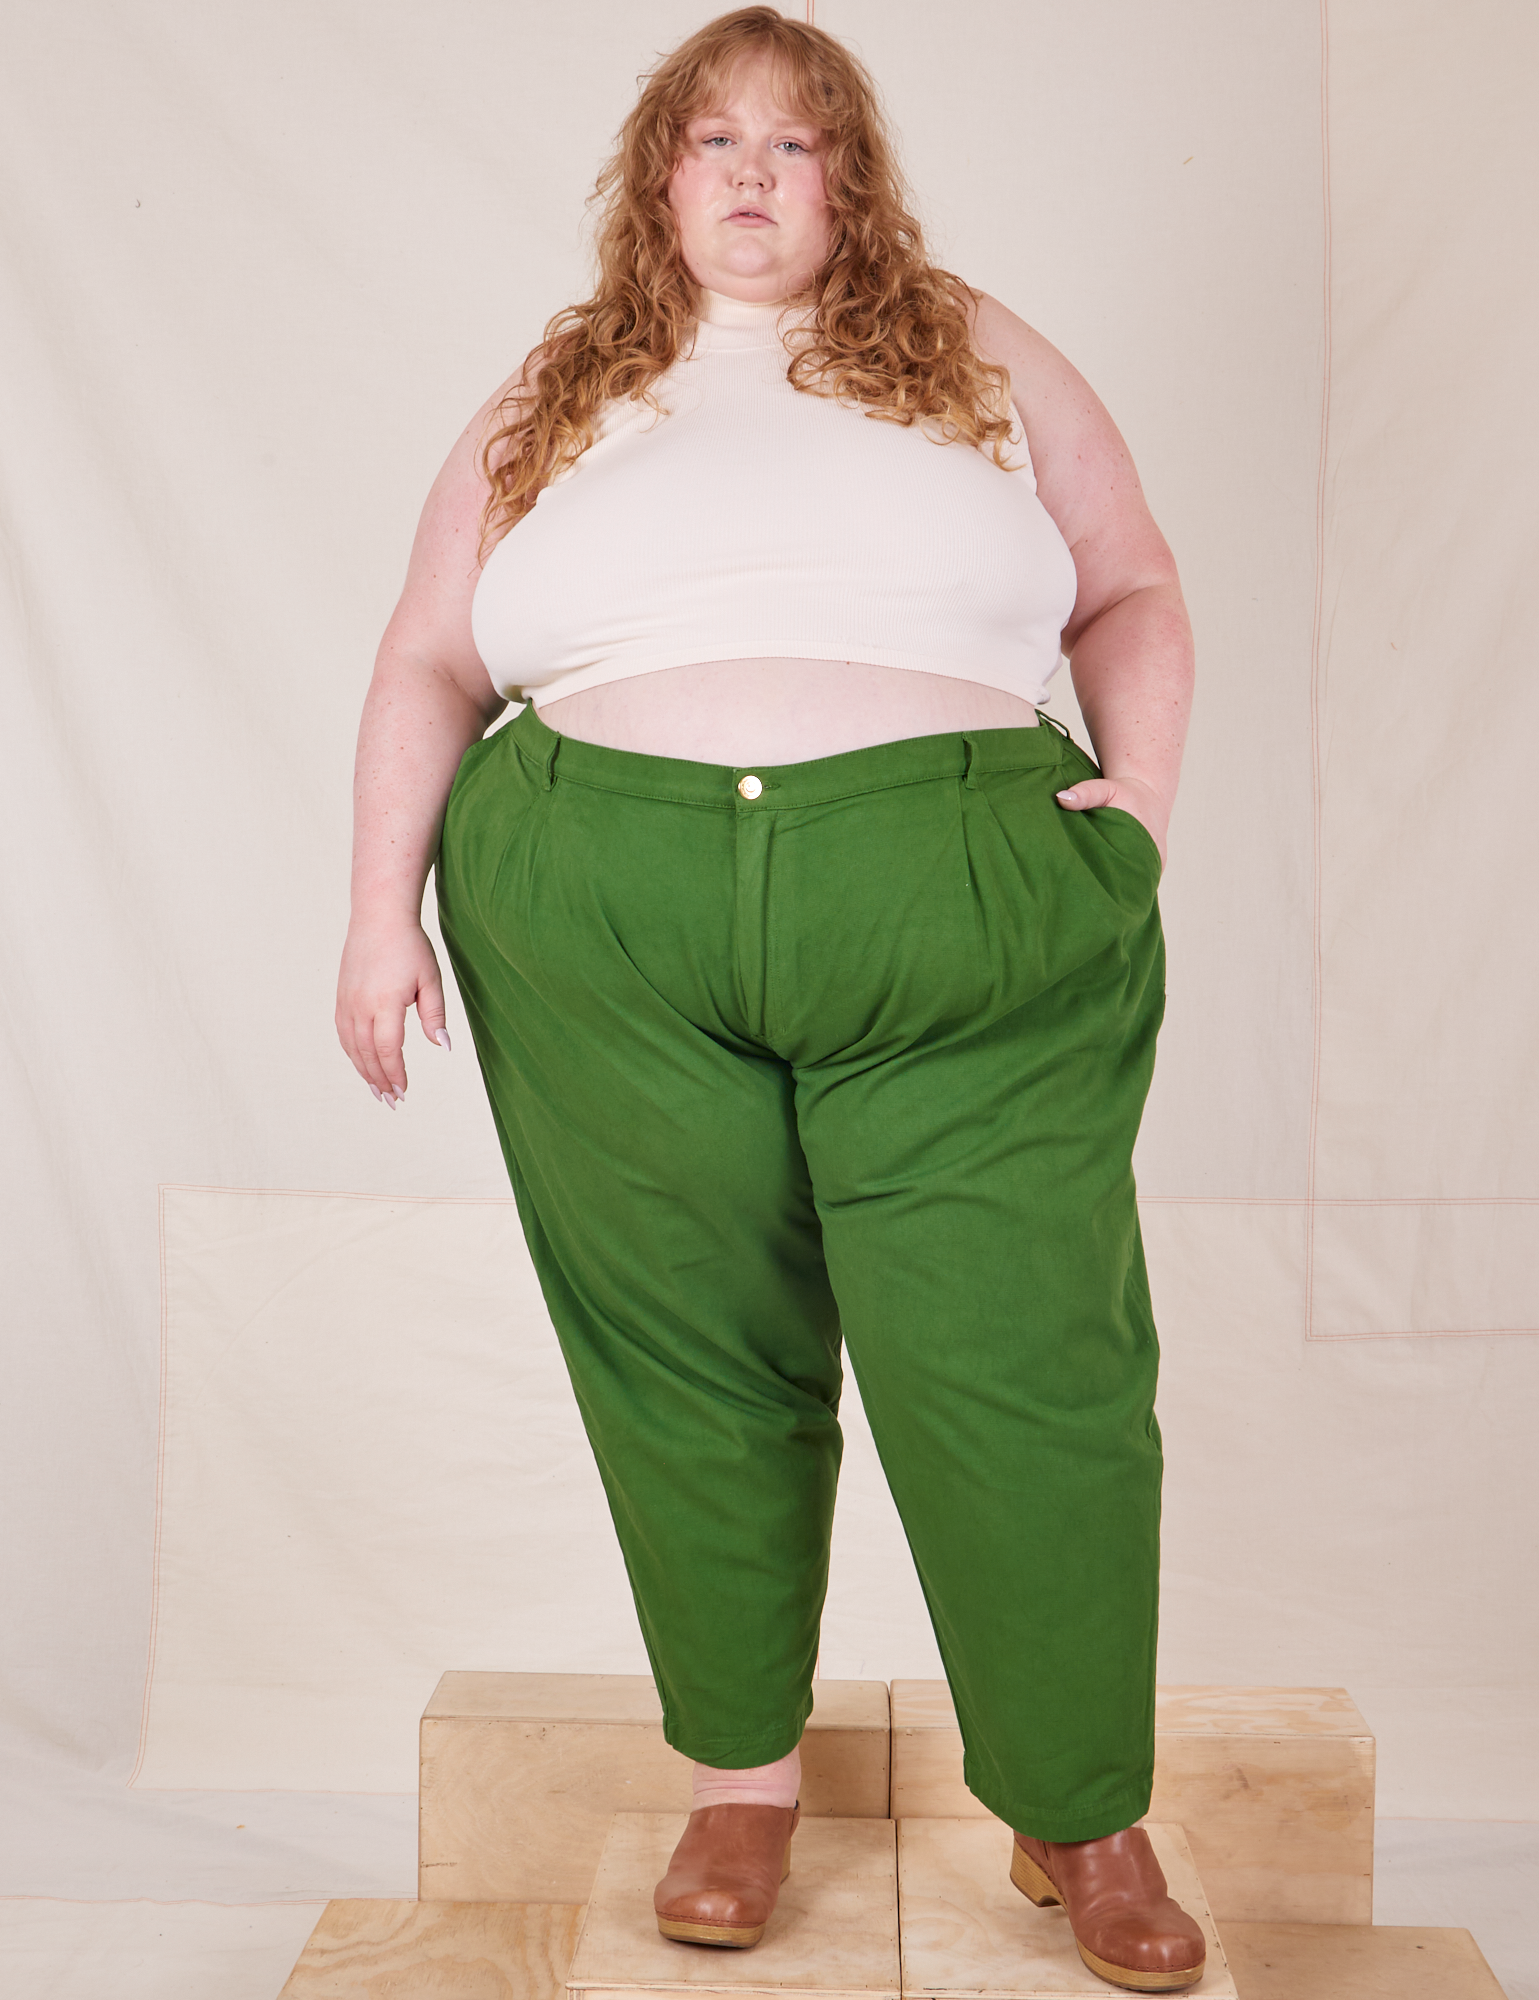 Catie is 5&#39;11&quot; and wearing 4XL Heavyweight Trousers in Lawn Green paired with vintage off-white Sleeveless Turtleneck